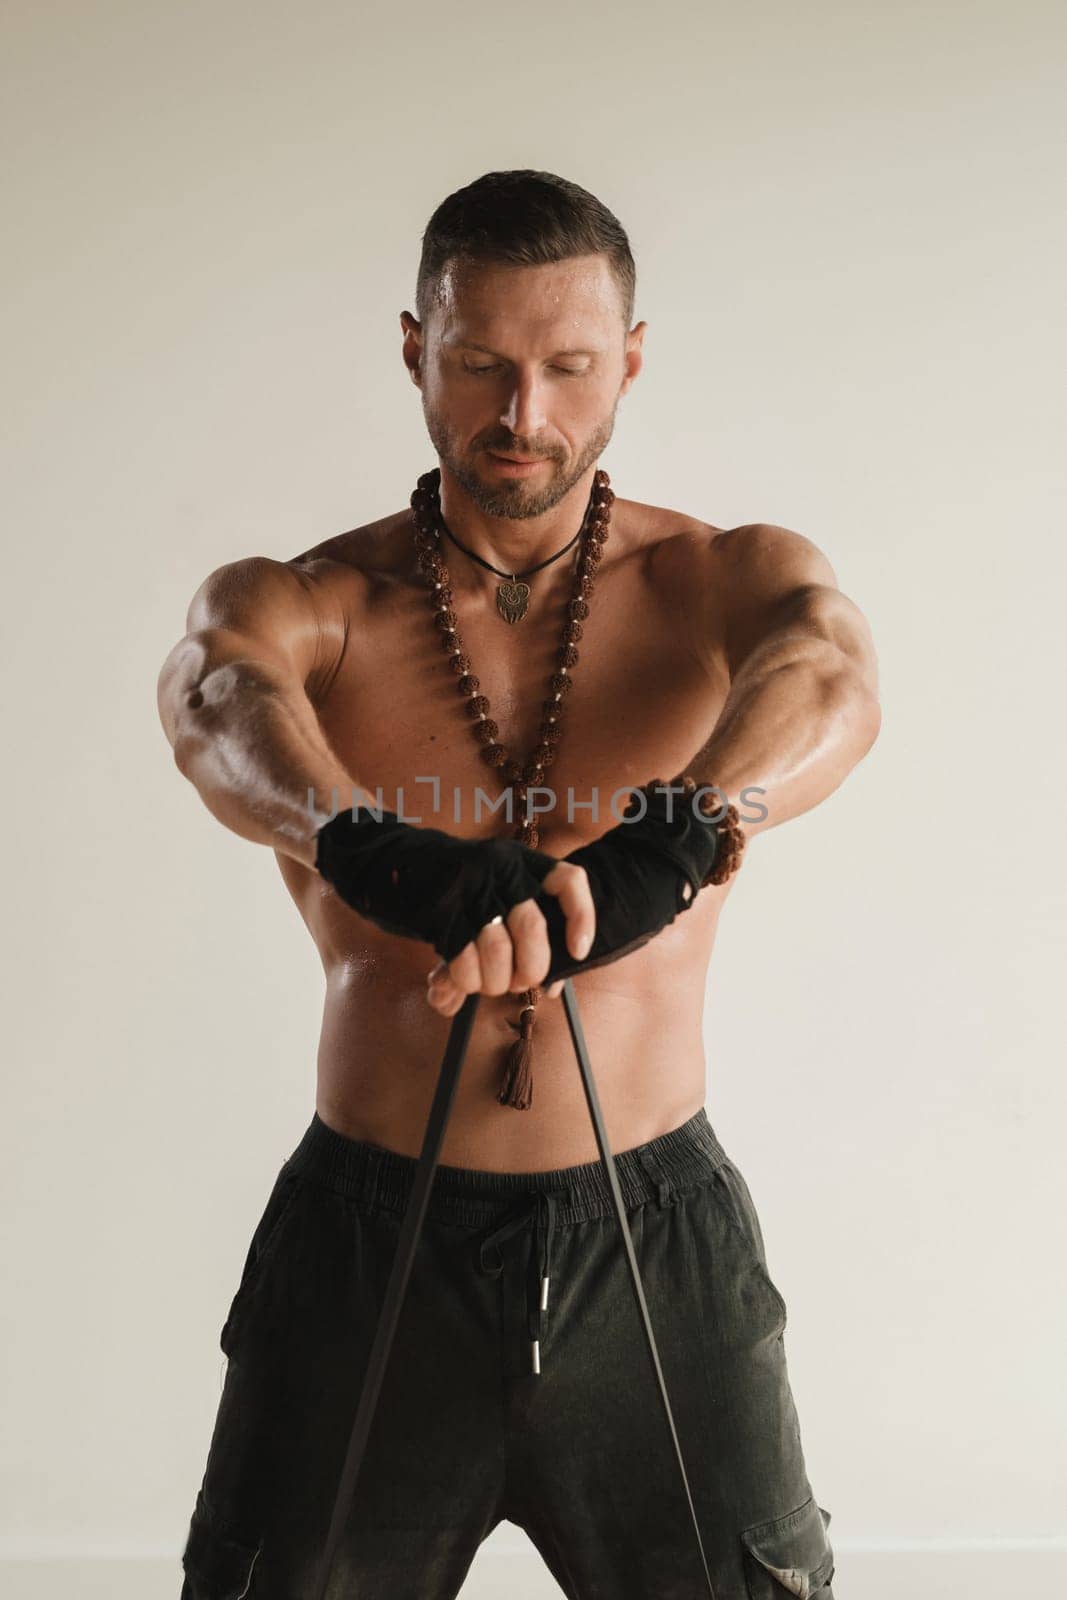 A man with a naked torso is engaged in strength fitness using a rubber loop indoors.